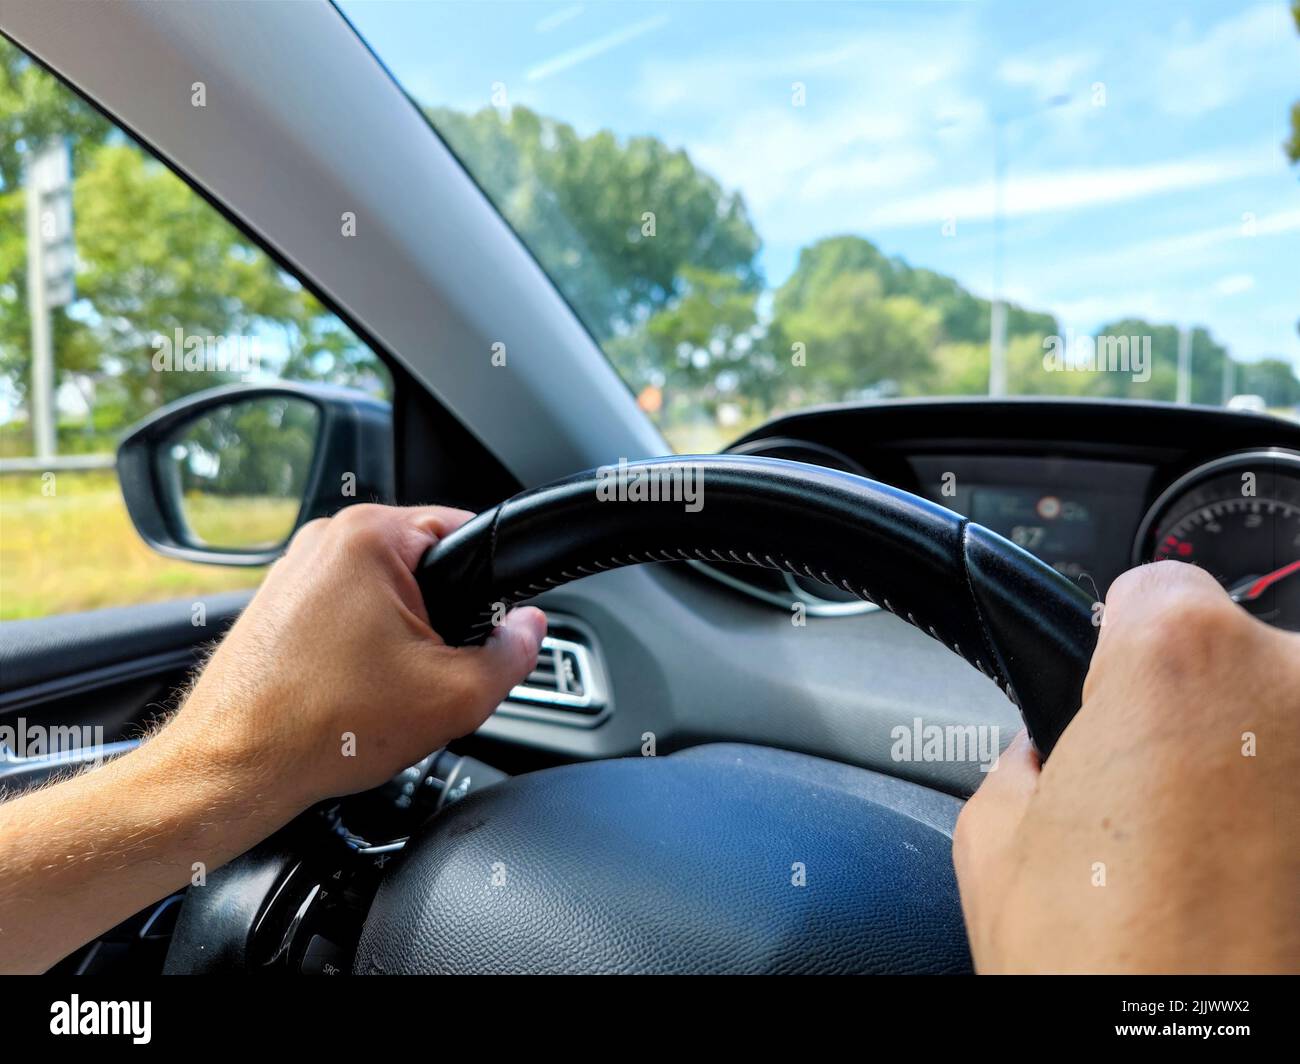 White men hands control a car steering wheel while driving on the road. There are no recognizable persons or trademarks in the shot. Stock Photo